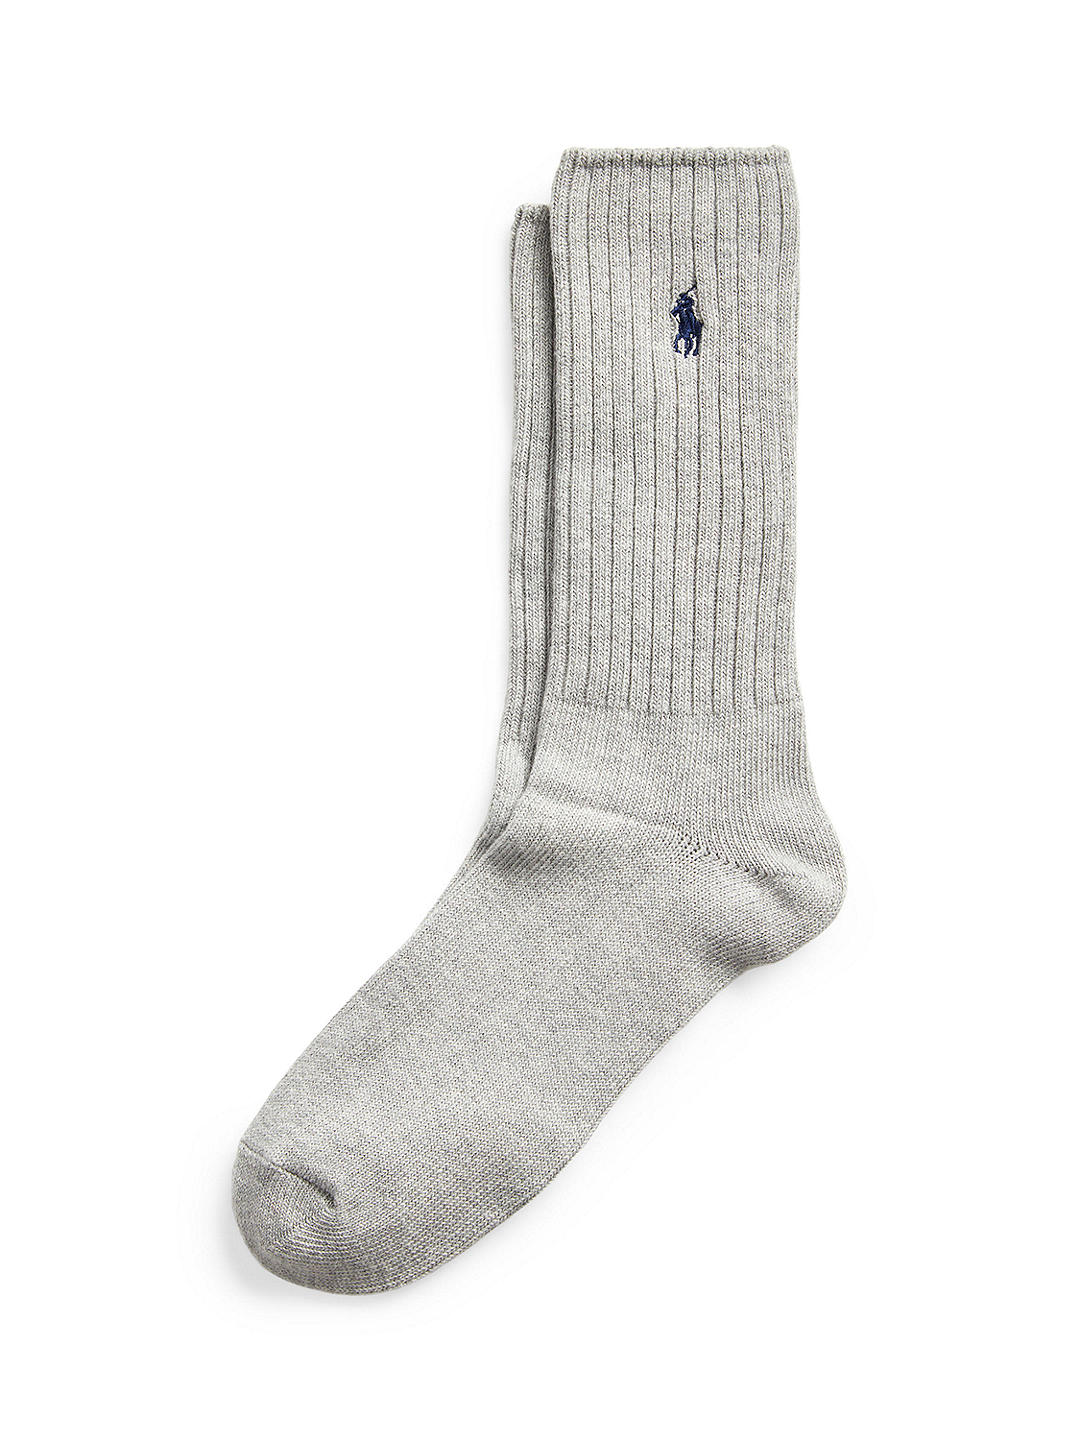 Polo Ralph Lauren Ribbed Cotton Socks, One Size, Grey at John Lewis ...